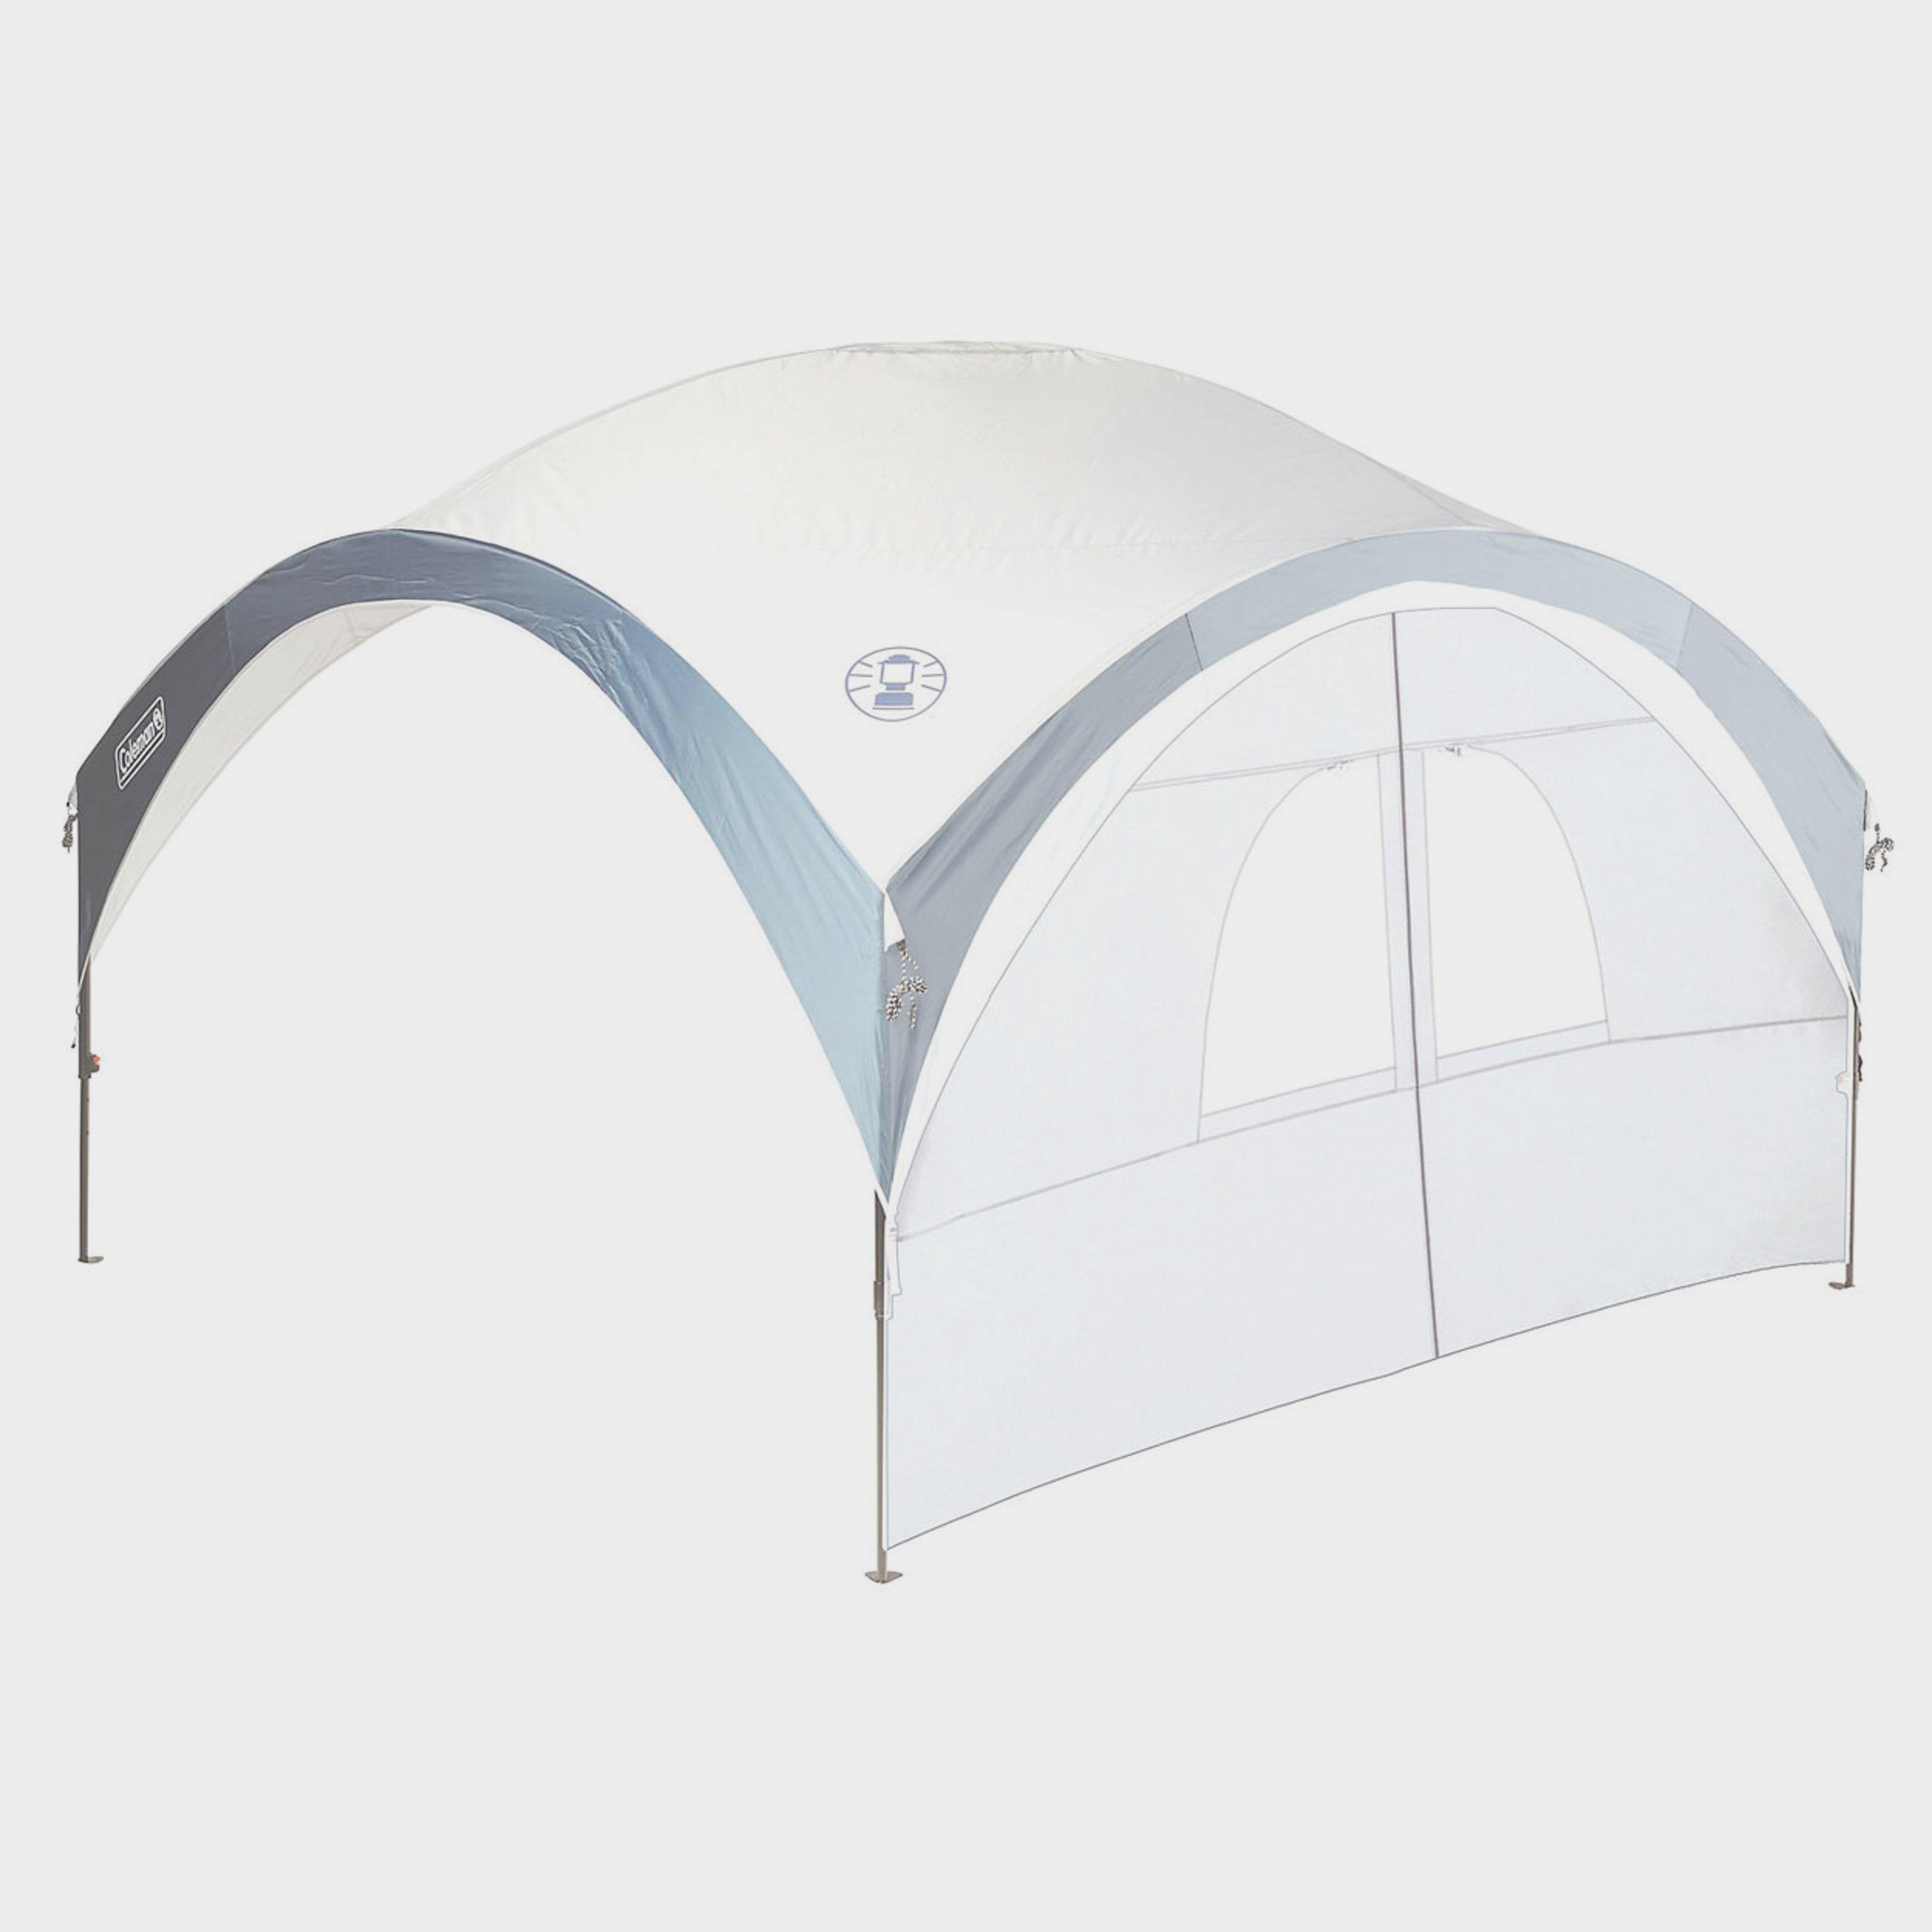  COLEMAN FastPitch Event Shelter Pro L Sunwall With Door, White